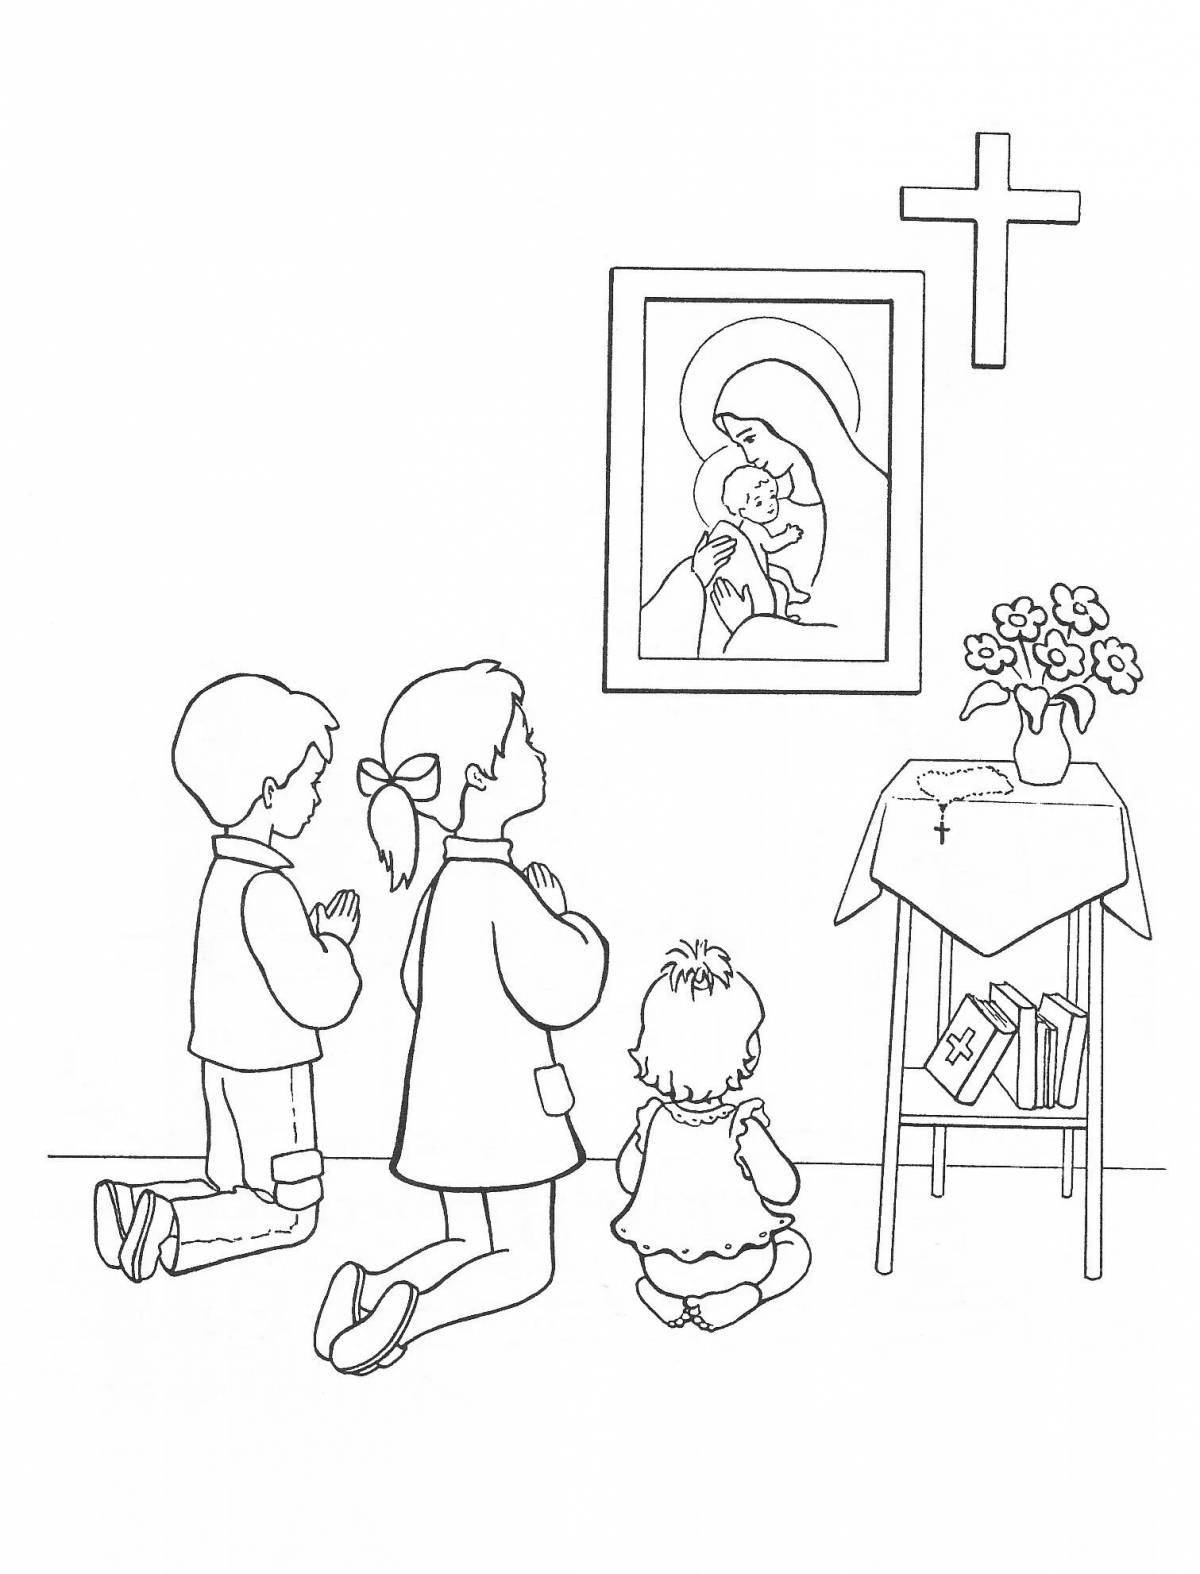 Playful orthodox coloring book for kids